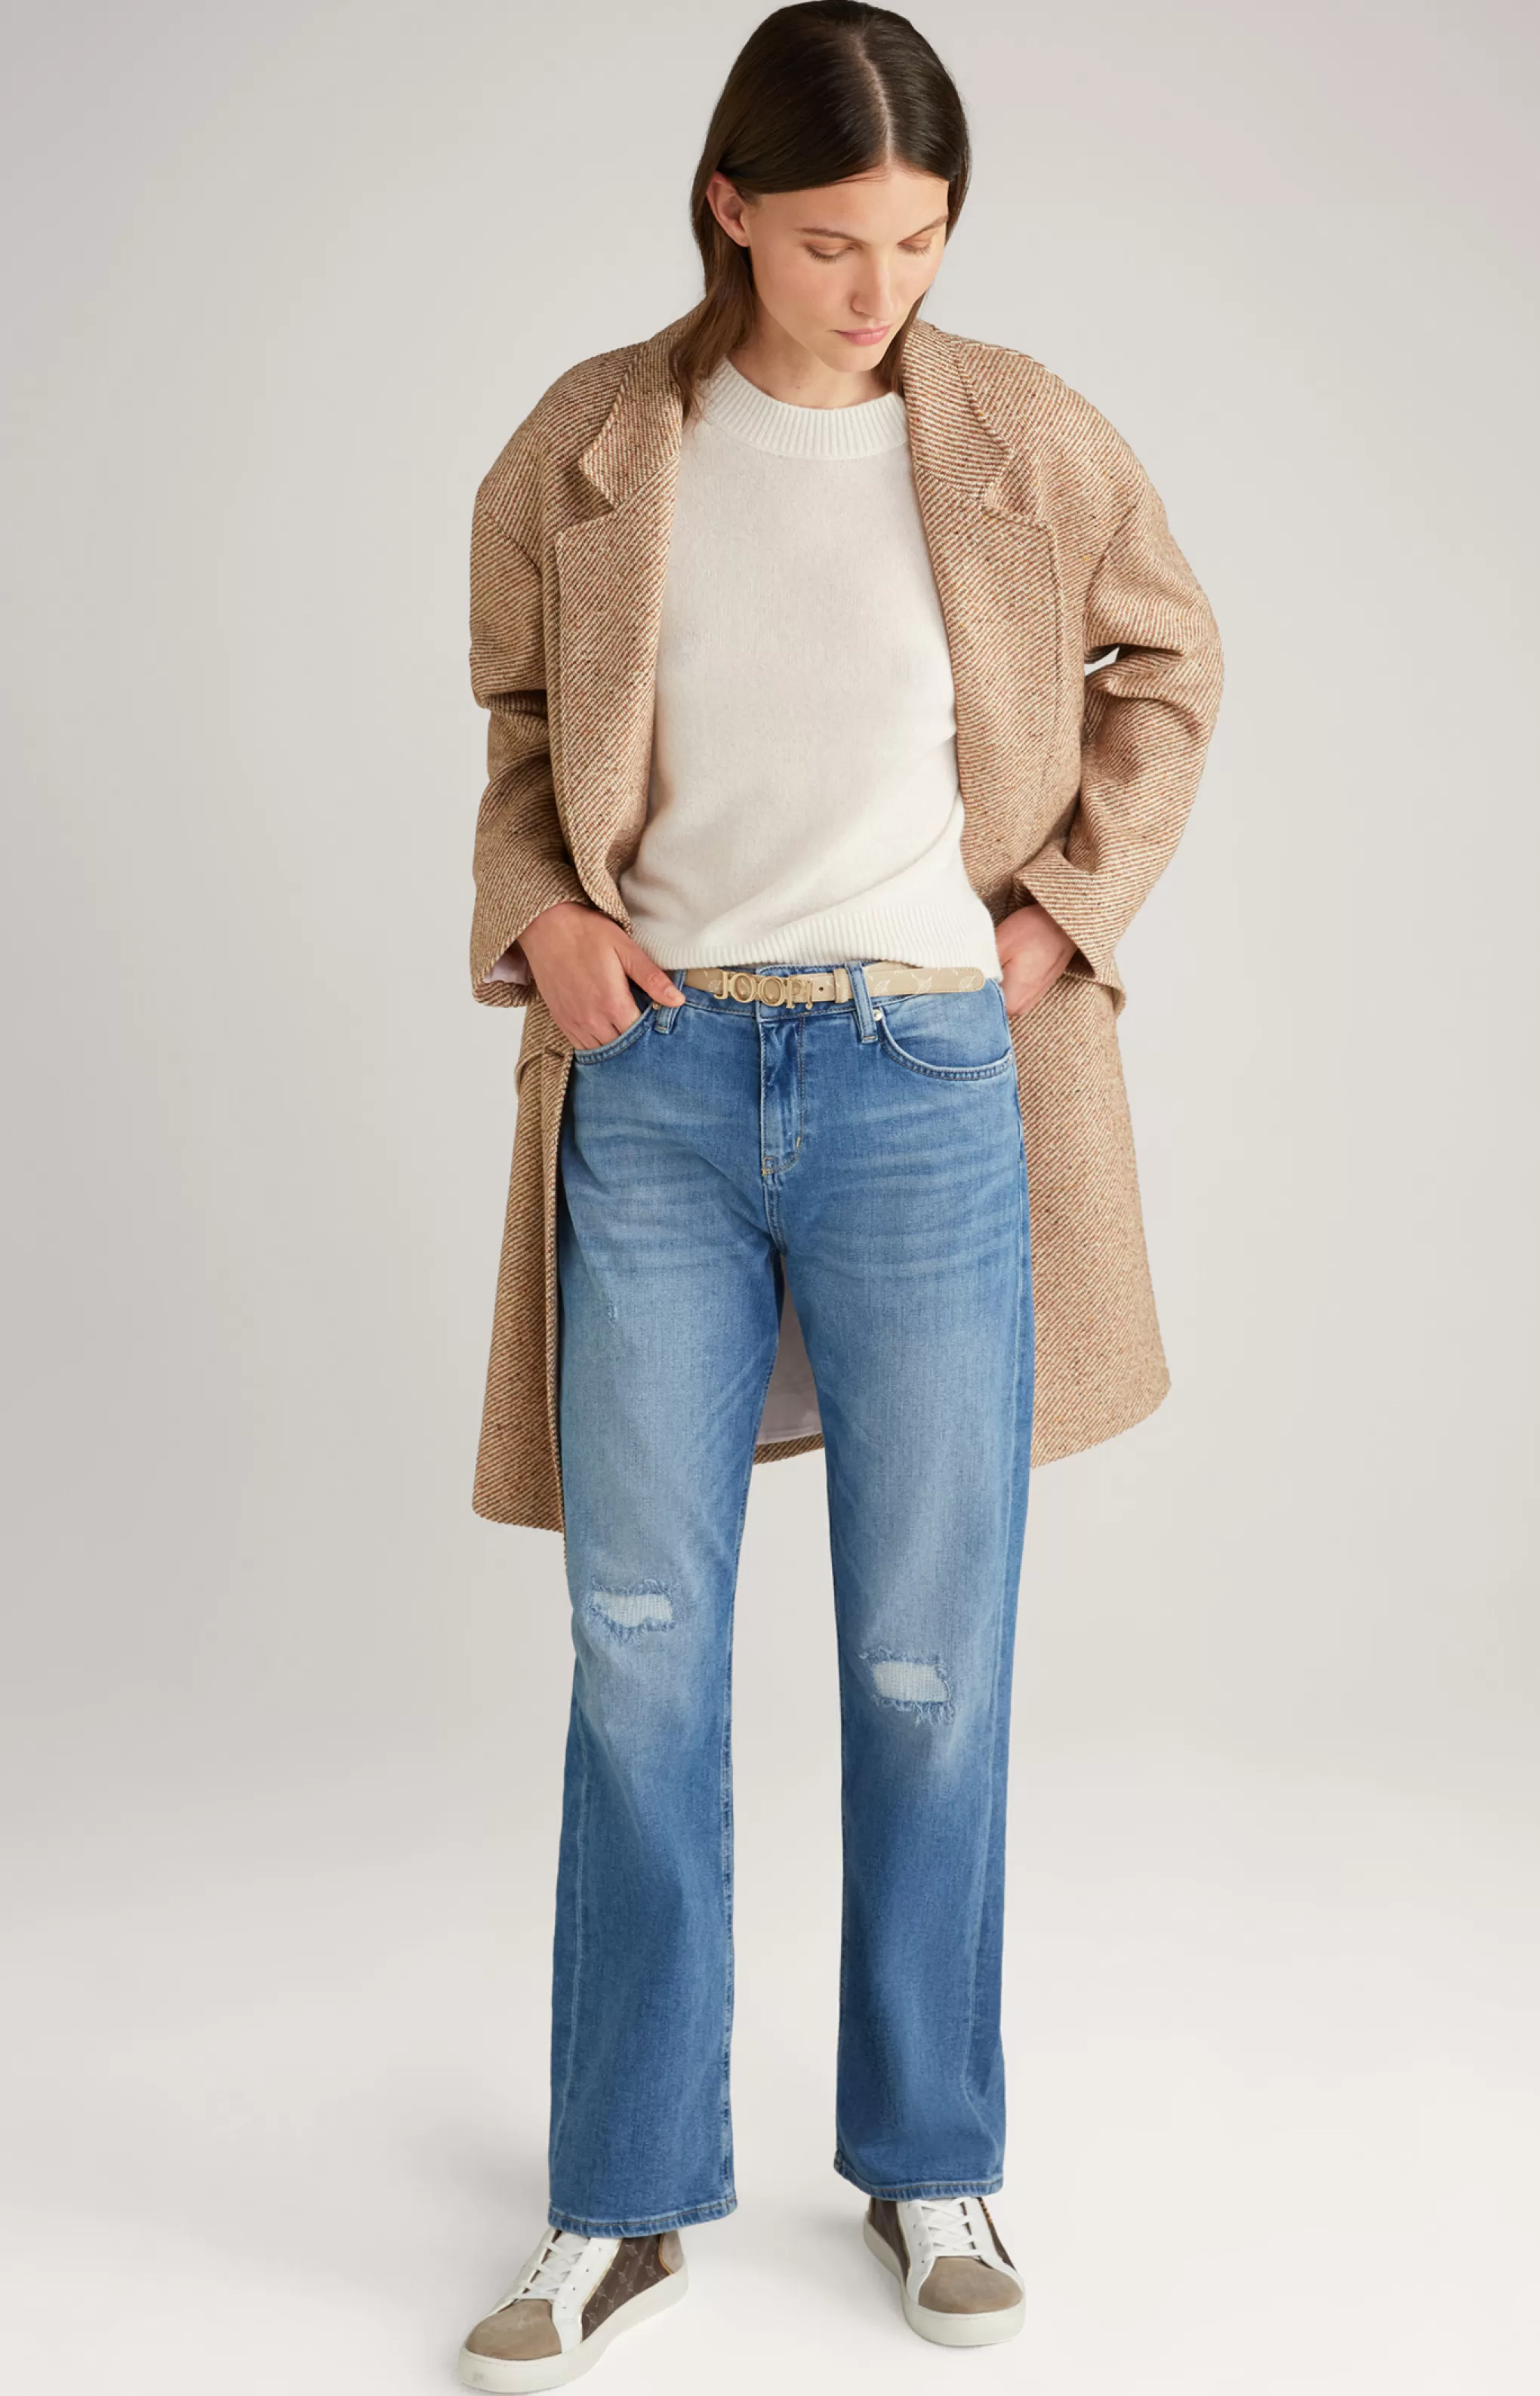 Jeans | Clothing*JOOP Jeans | Clothing Jeans in a Denim Blue Washed Look